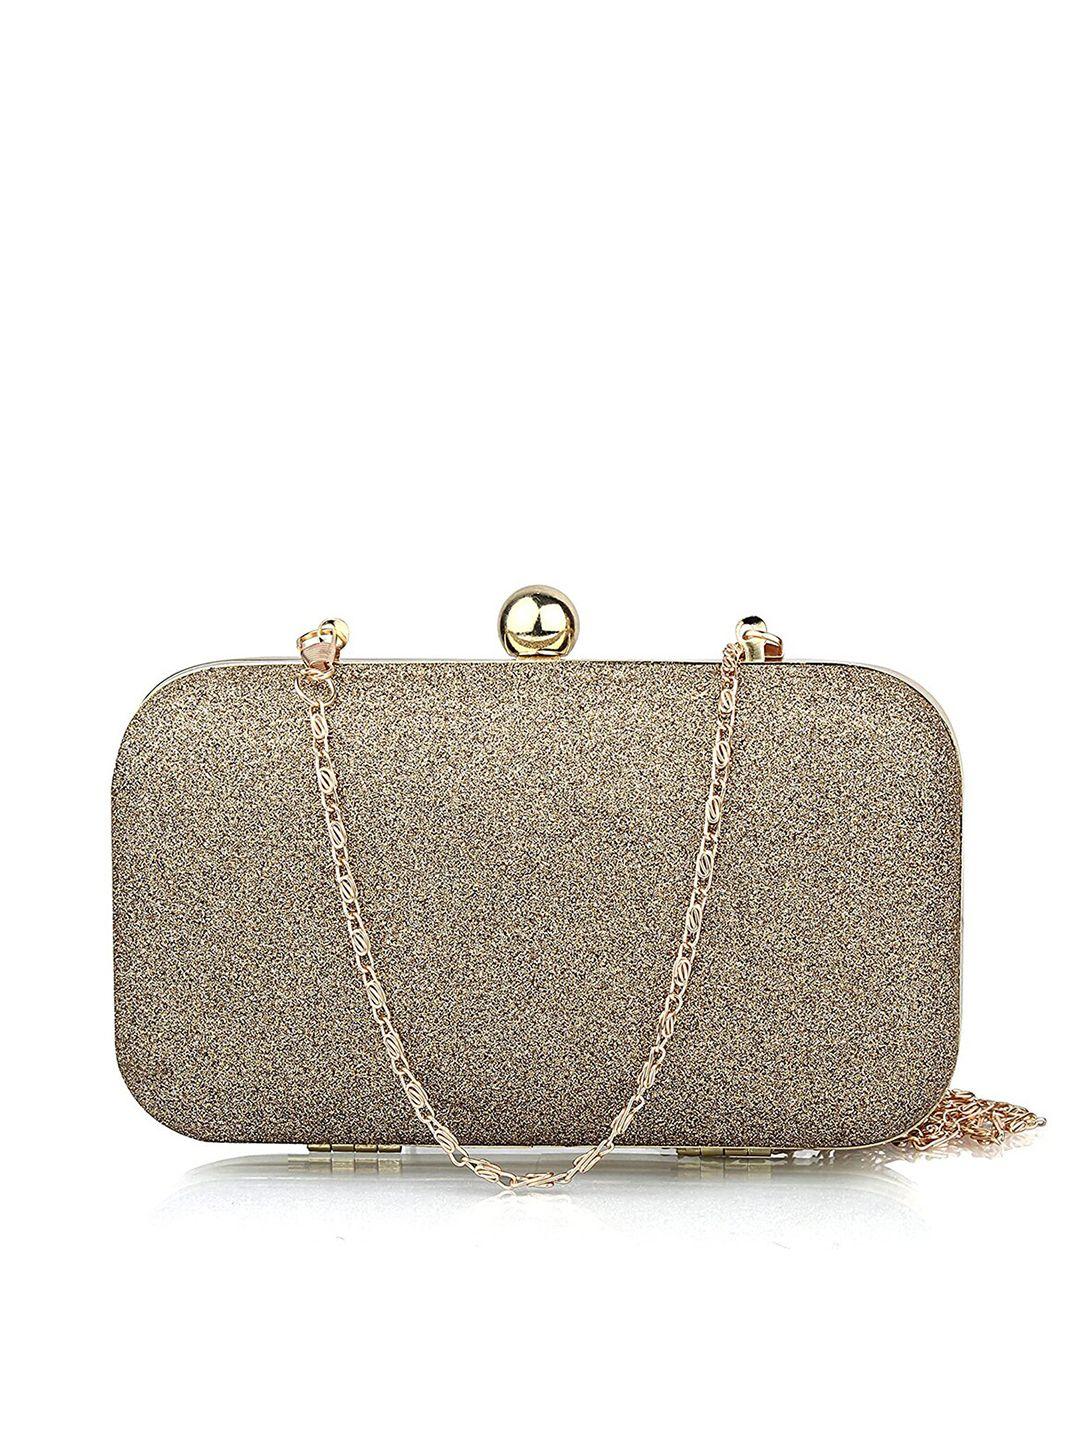 style shoes brown & gold-toned embroidered box clutch